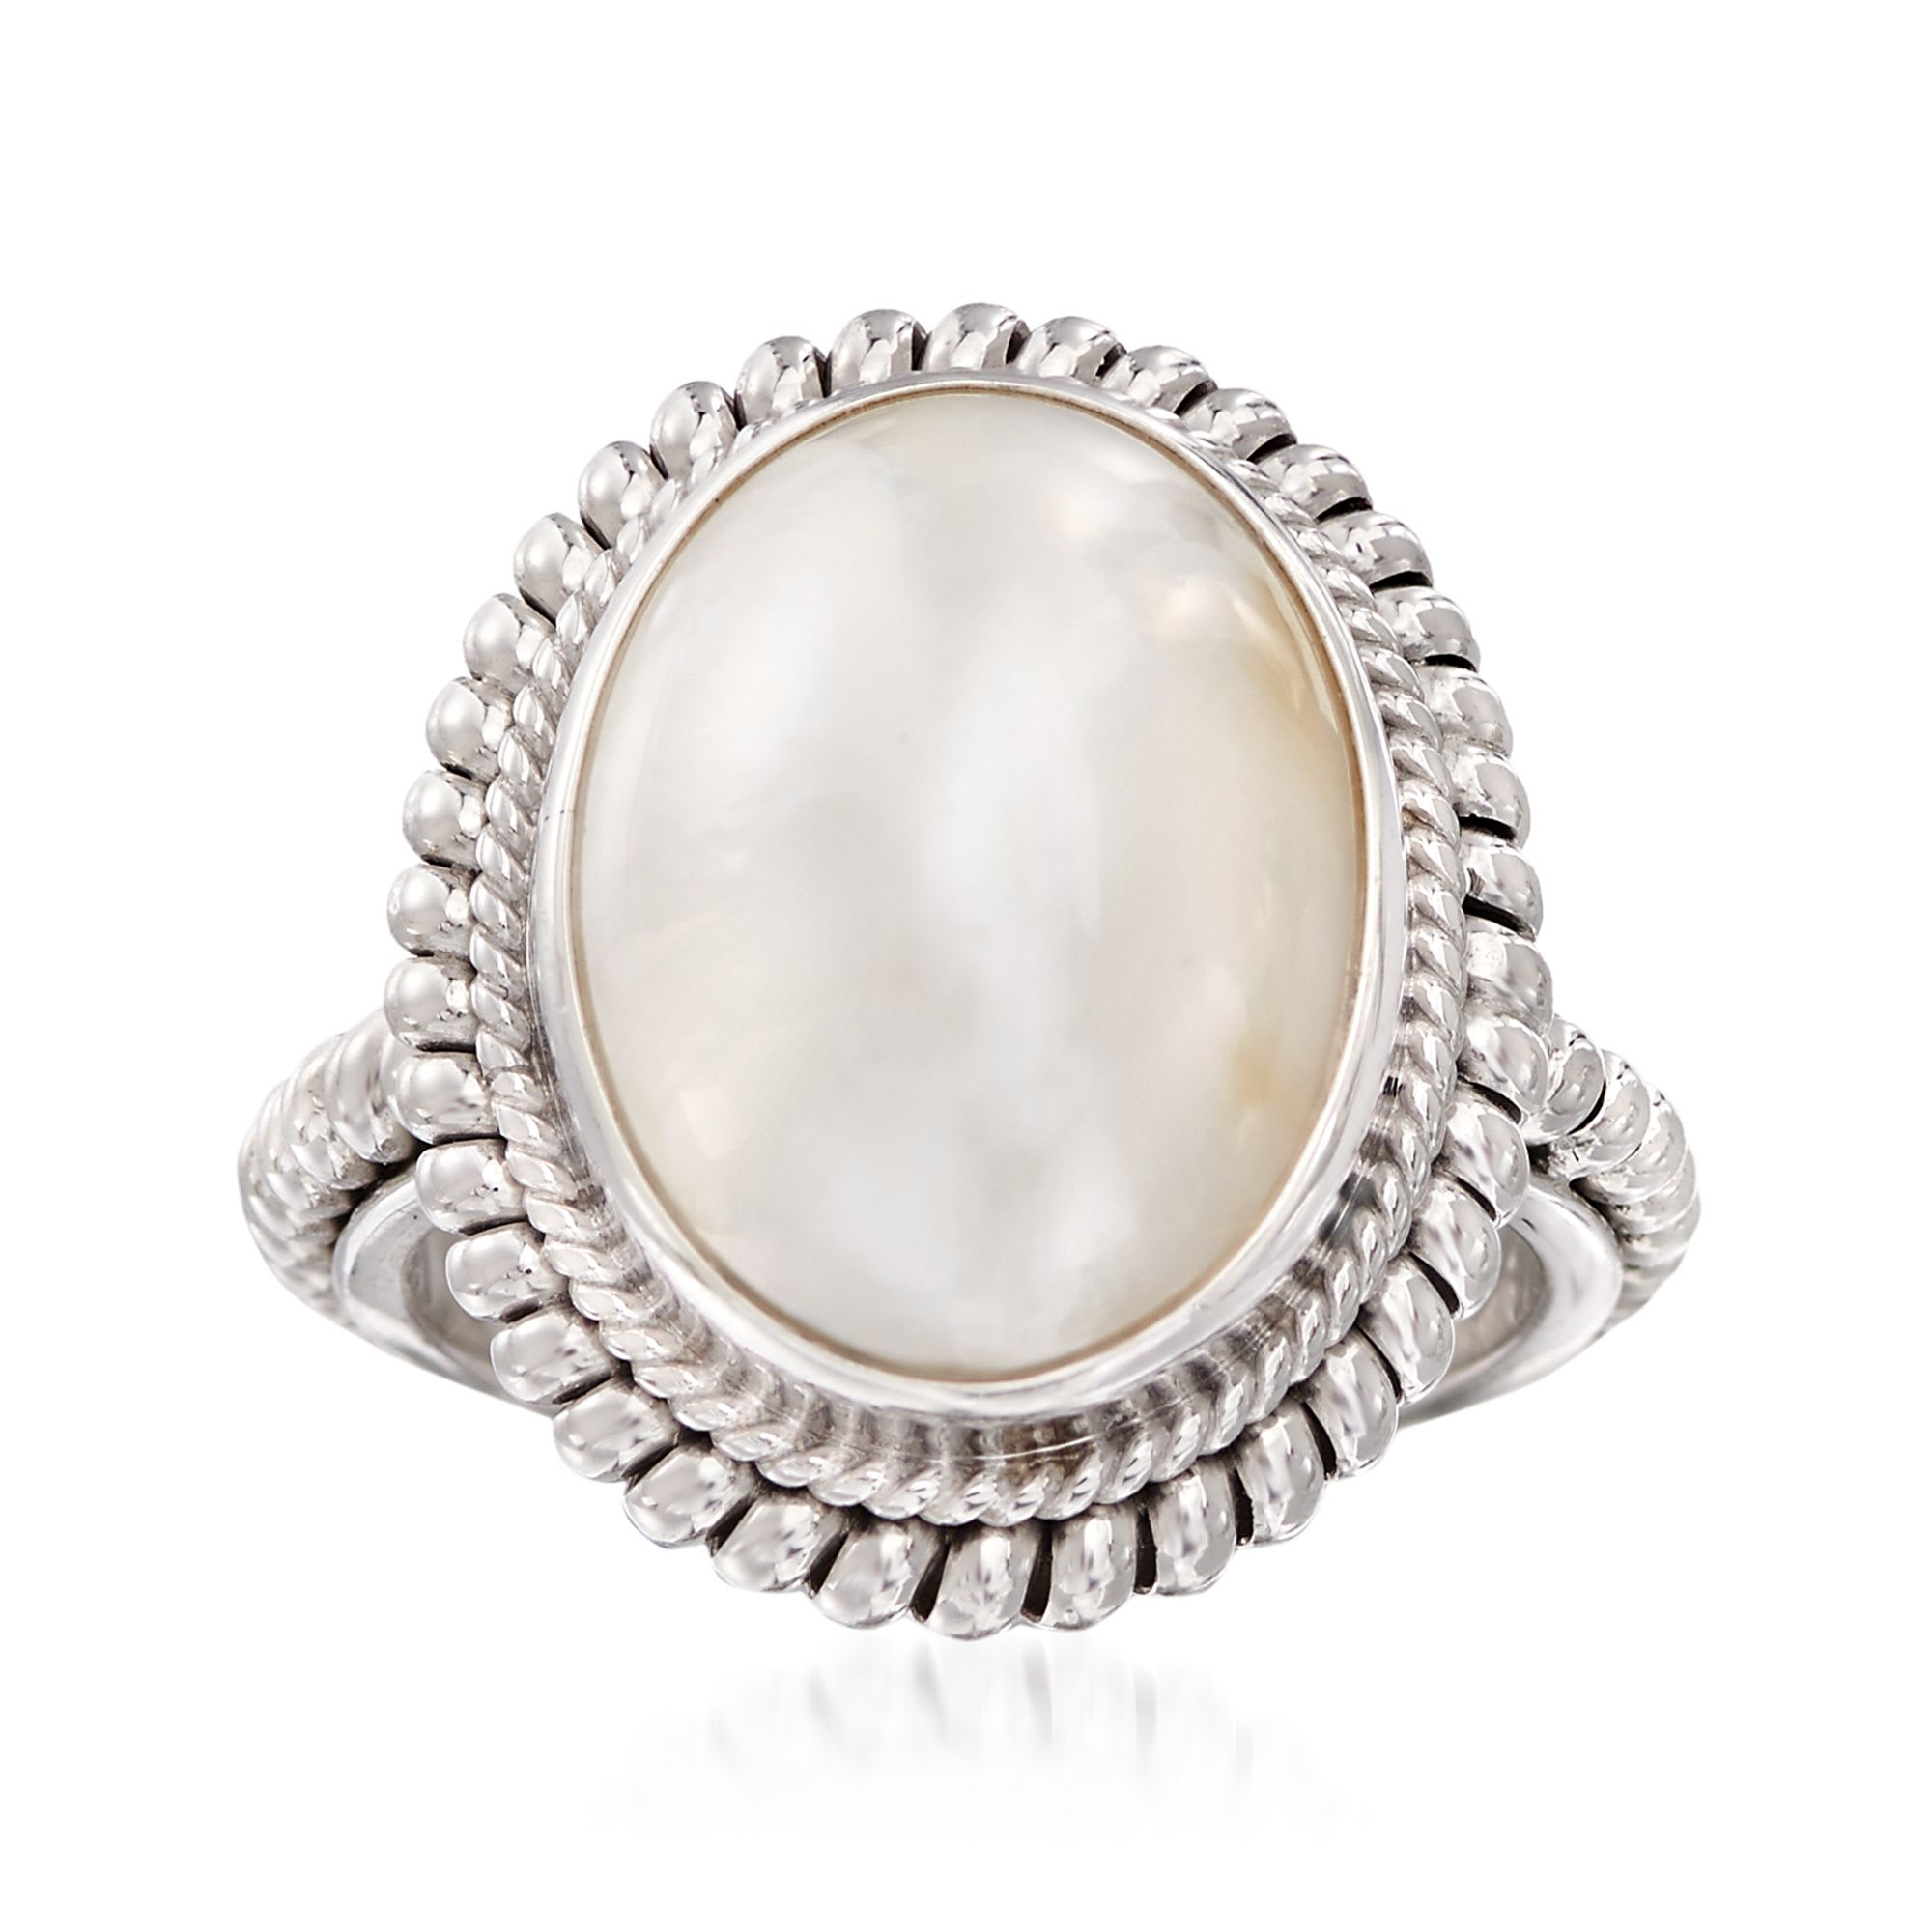 13-18mm Mabe Pearl Balinese Ring in Sterling Silver | Ross-Simons